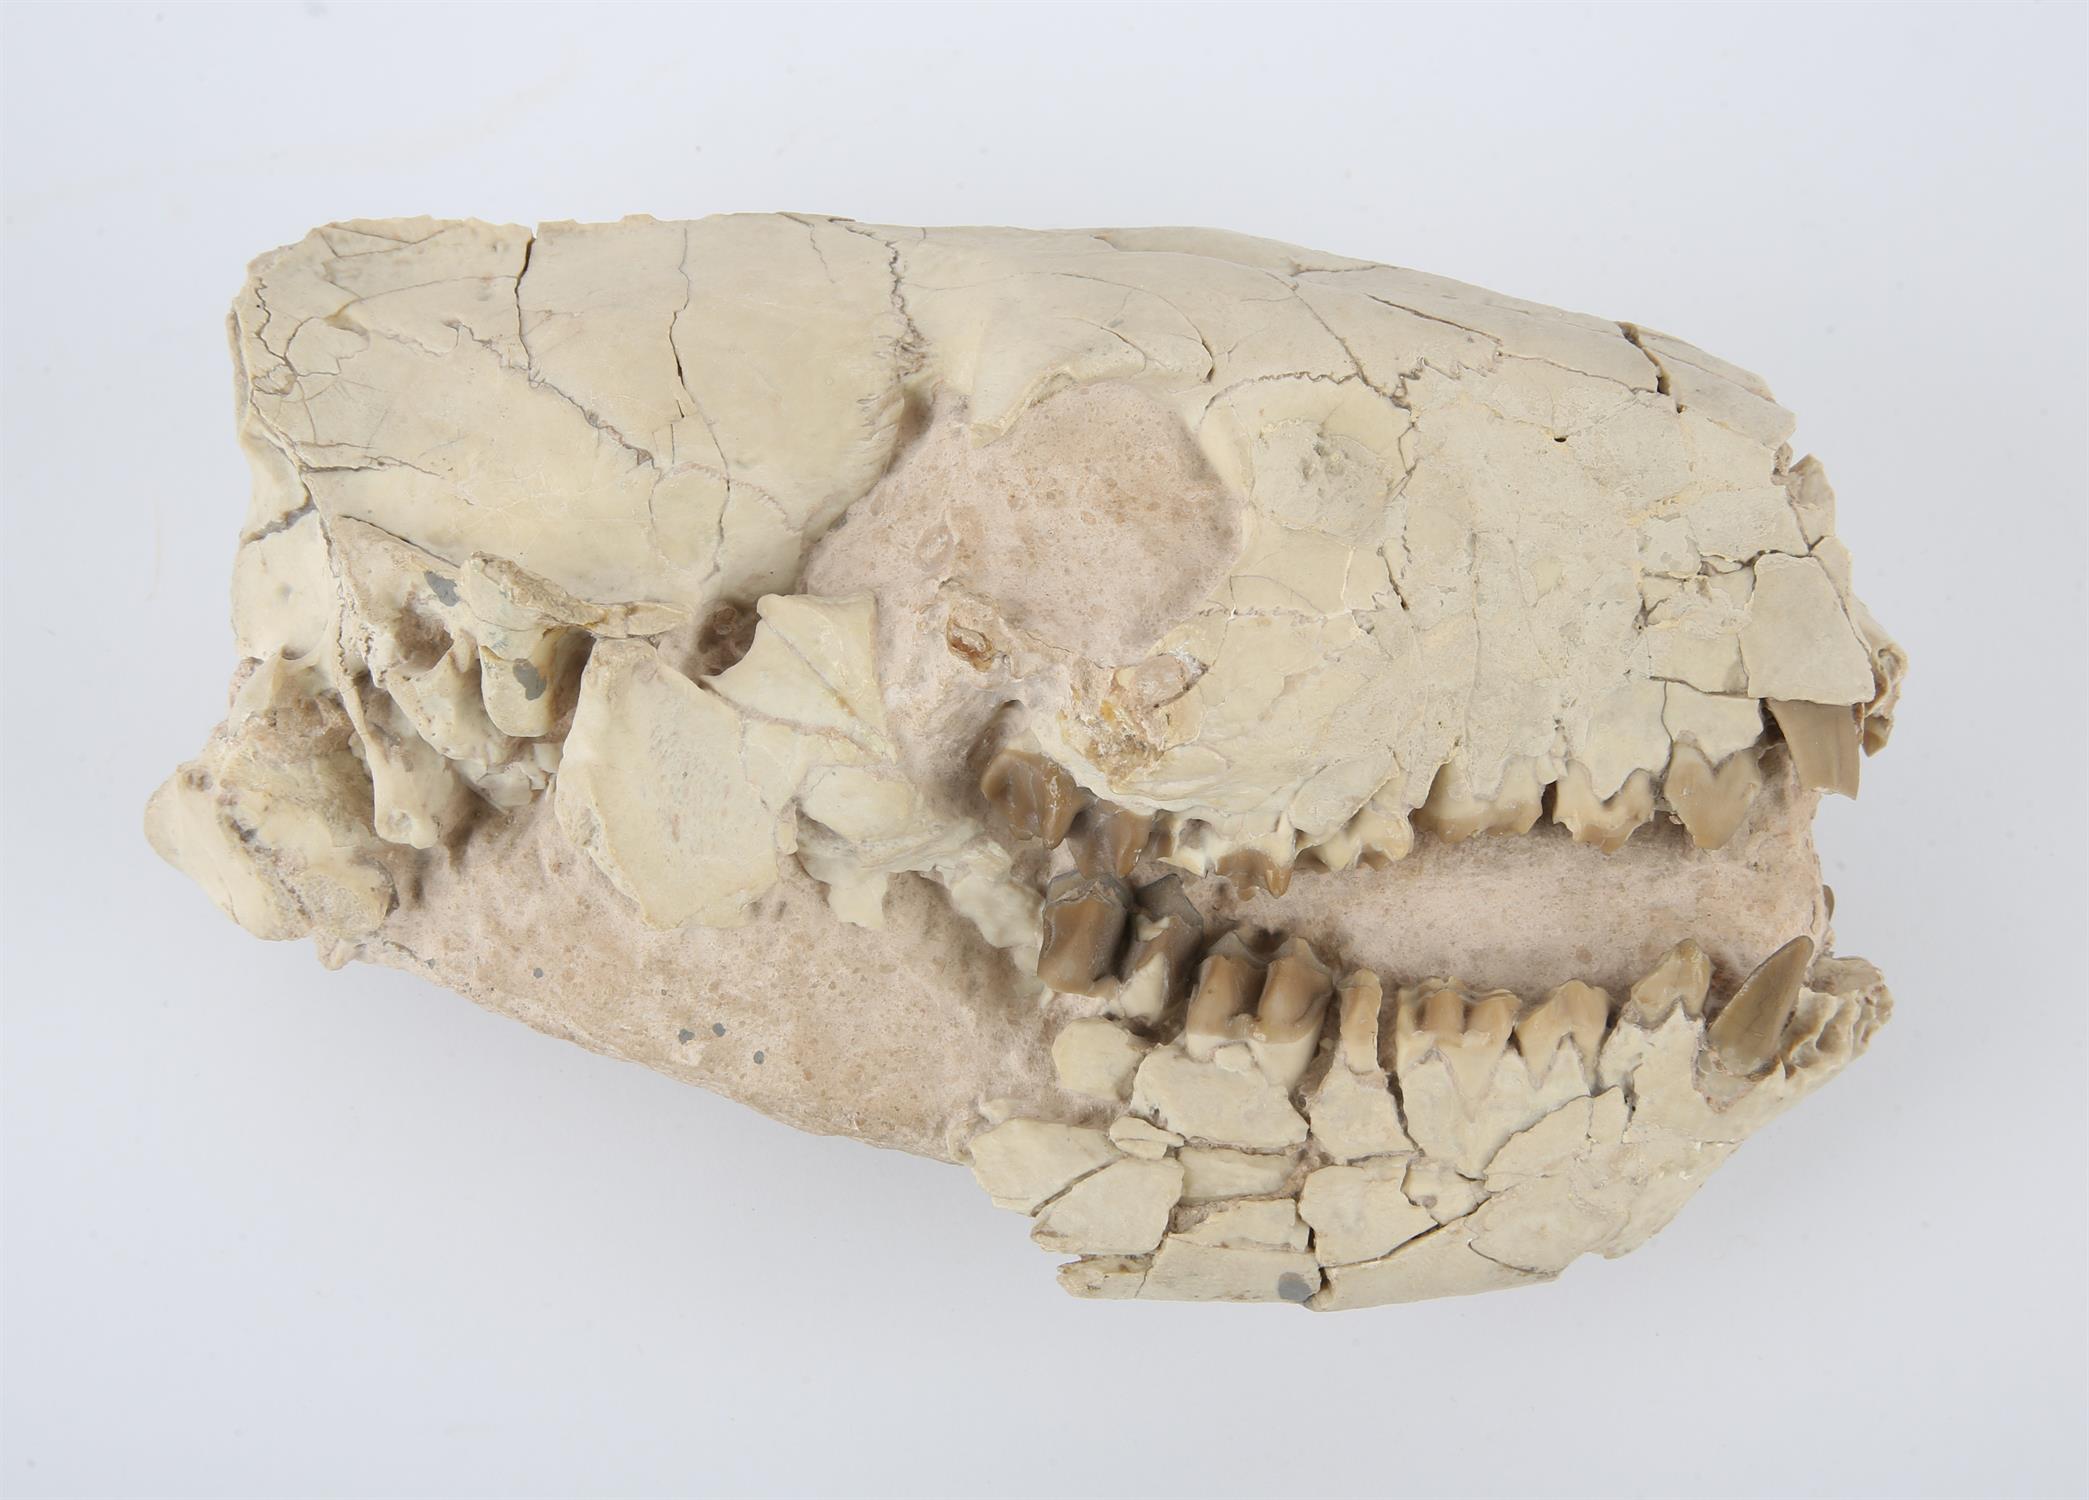 Unknown, Fossil scull in matrix, possibly hyena, 18cm x 12cm x 7cm - Image 2 of 2